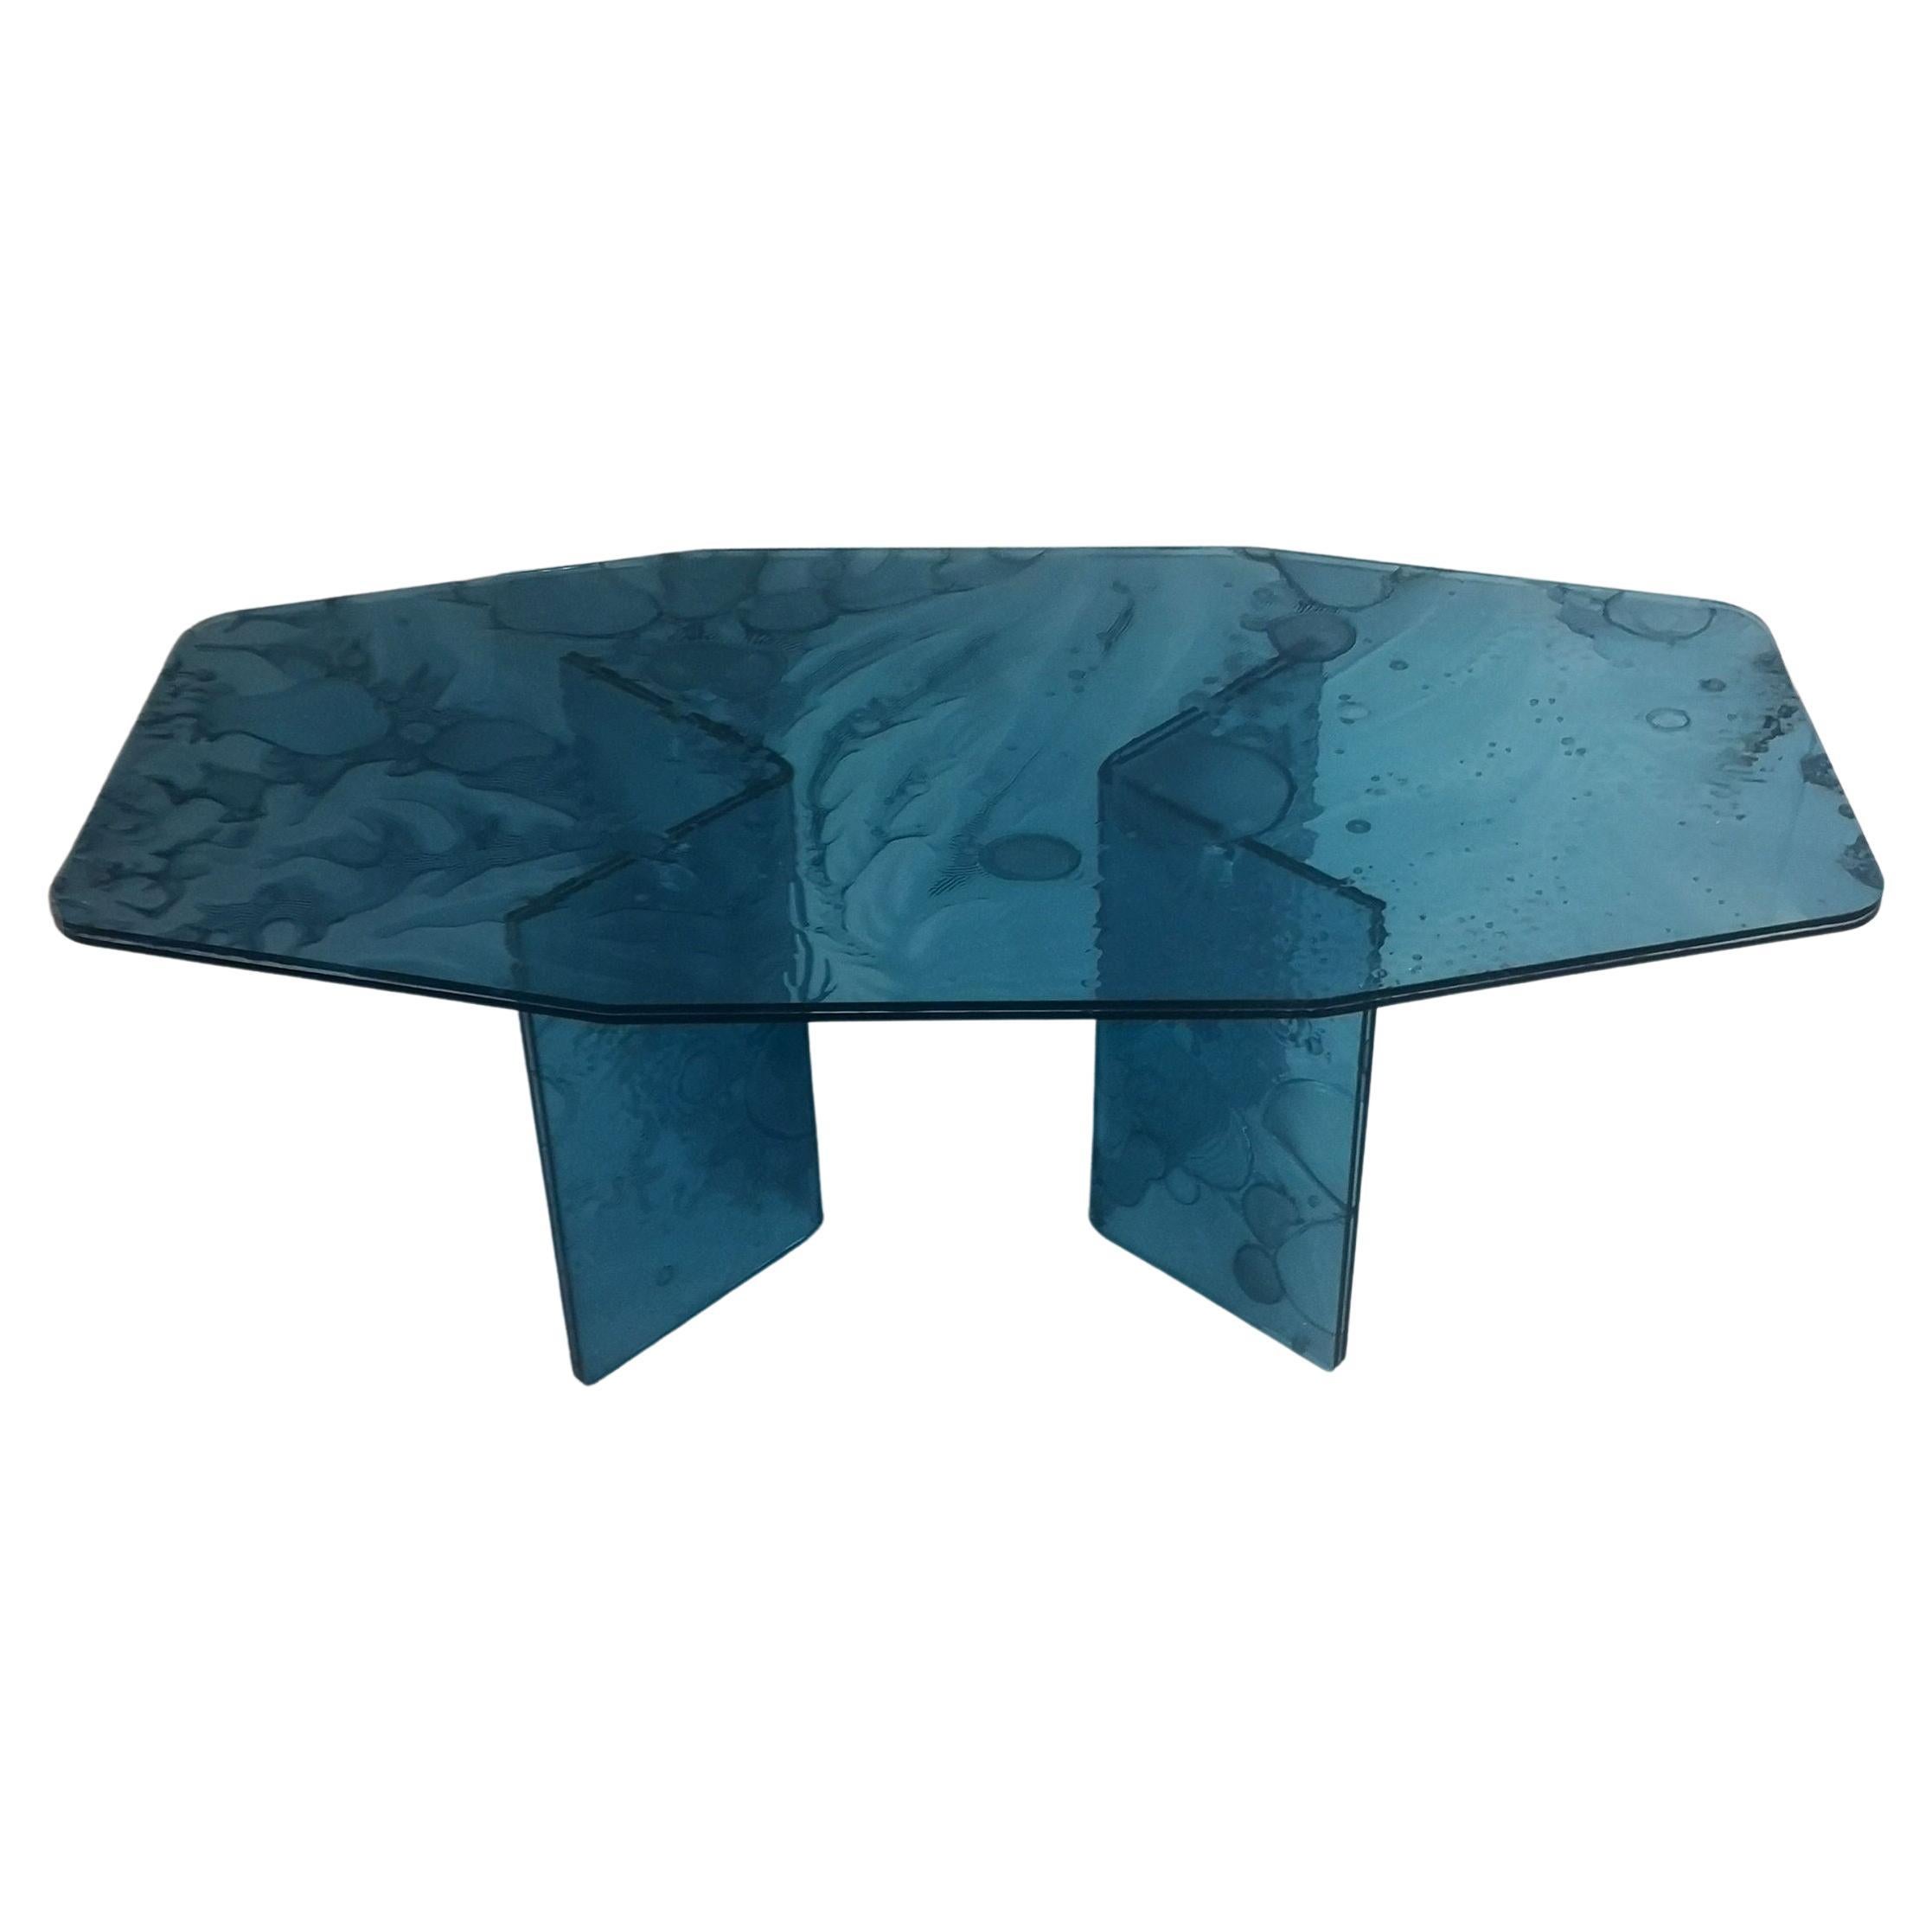 Sketch Coffe Table Made in Acrylic Design Roberto Giacomucci in 2021 For Sale